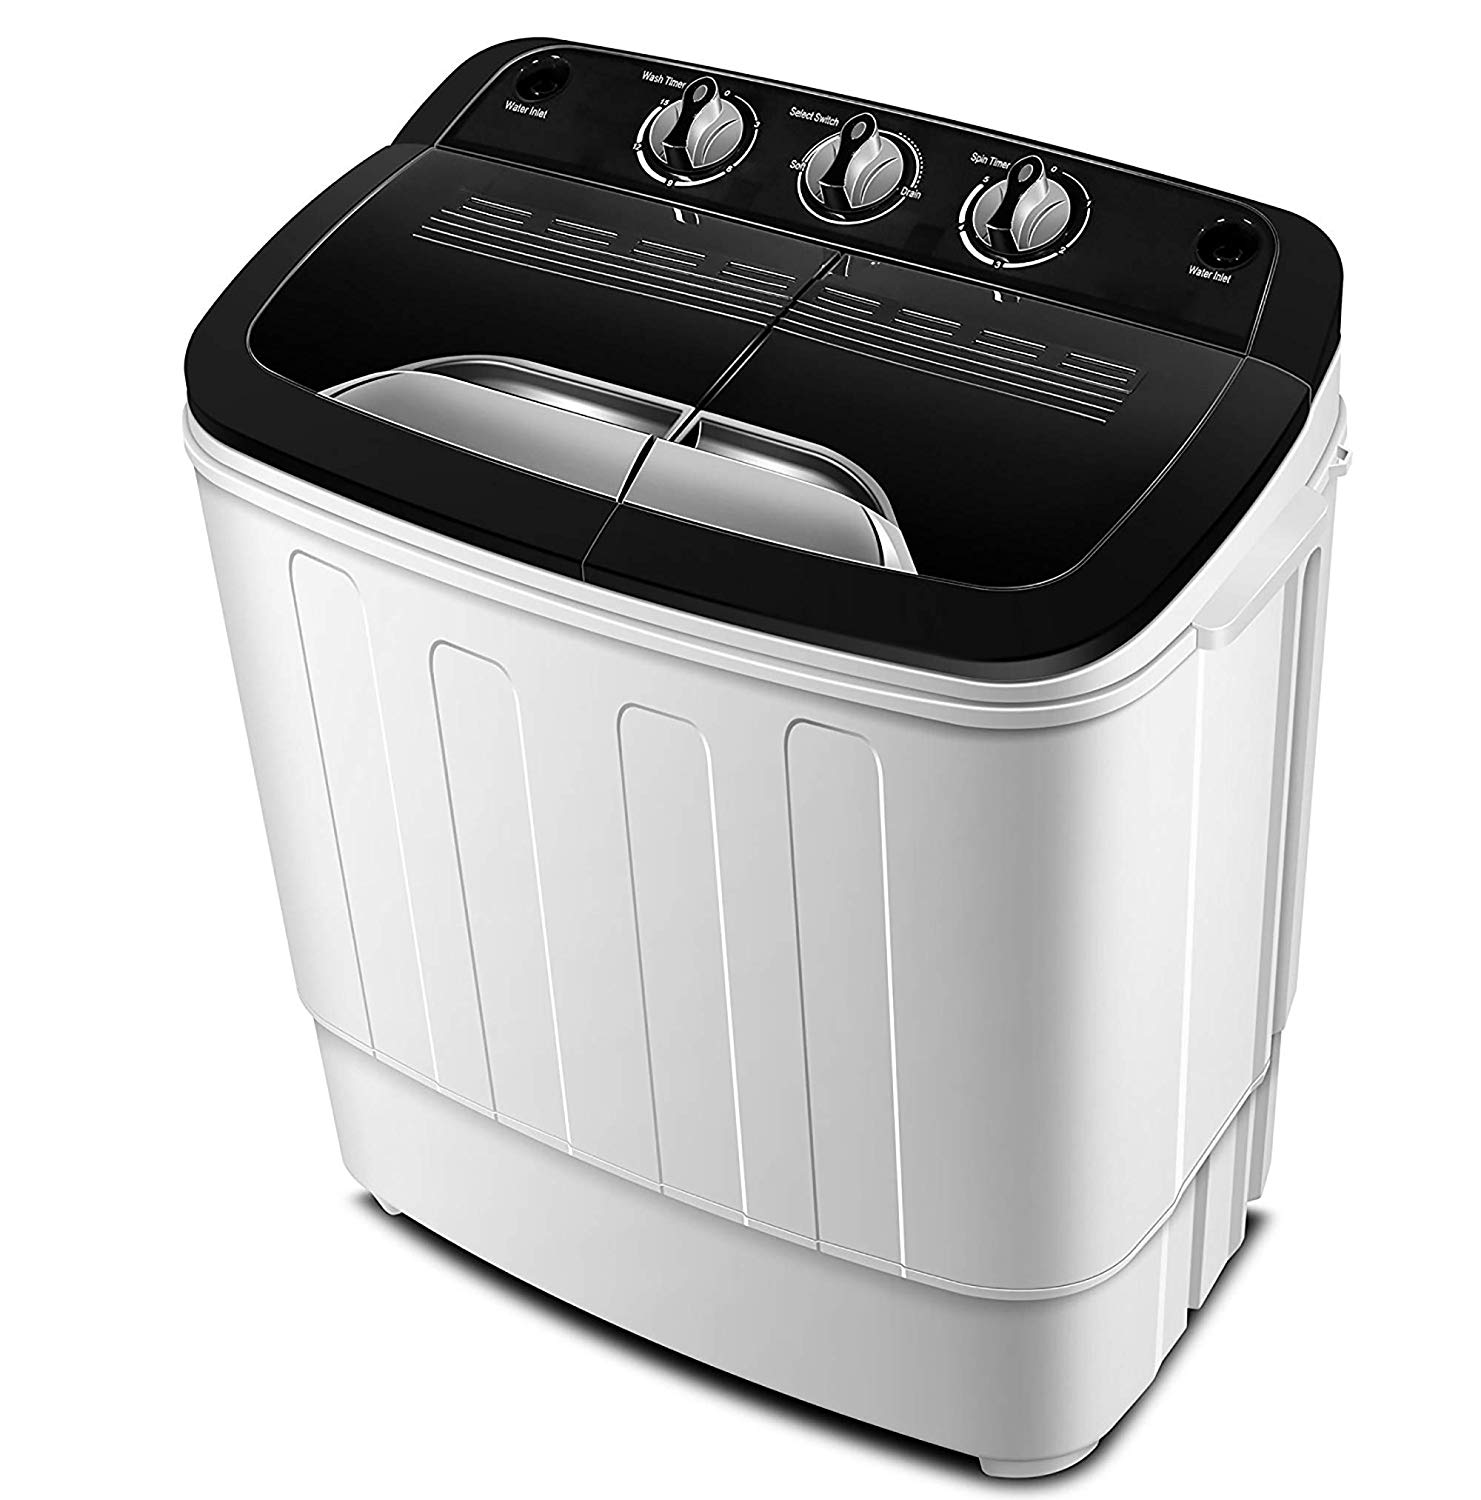 Portable Washing Machine TG23 - Twin Tub Washer Machine with Wash and Spin Cycle Compartments by ThinkGizmos (Trademark Protected)